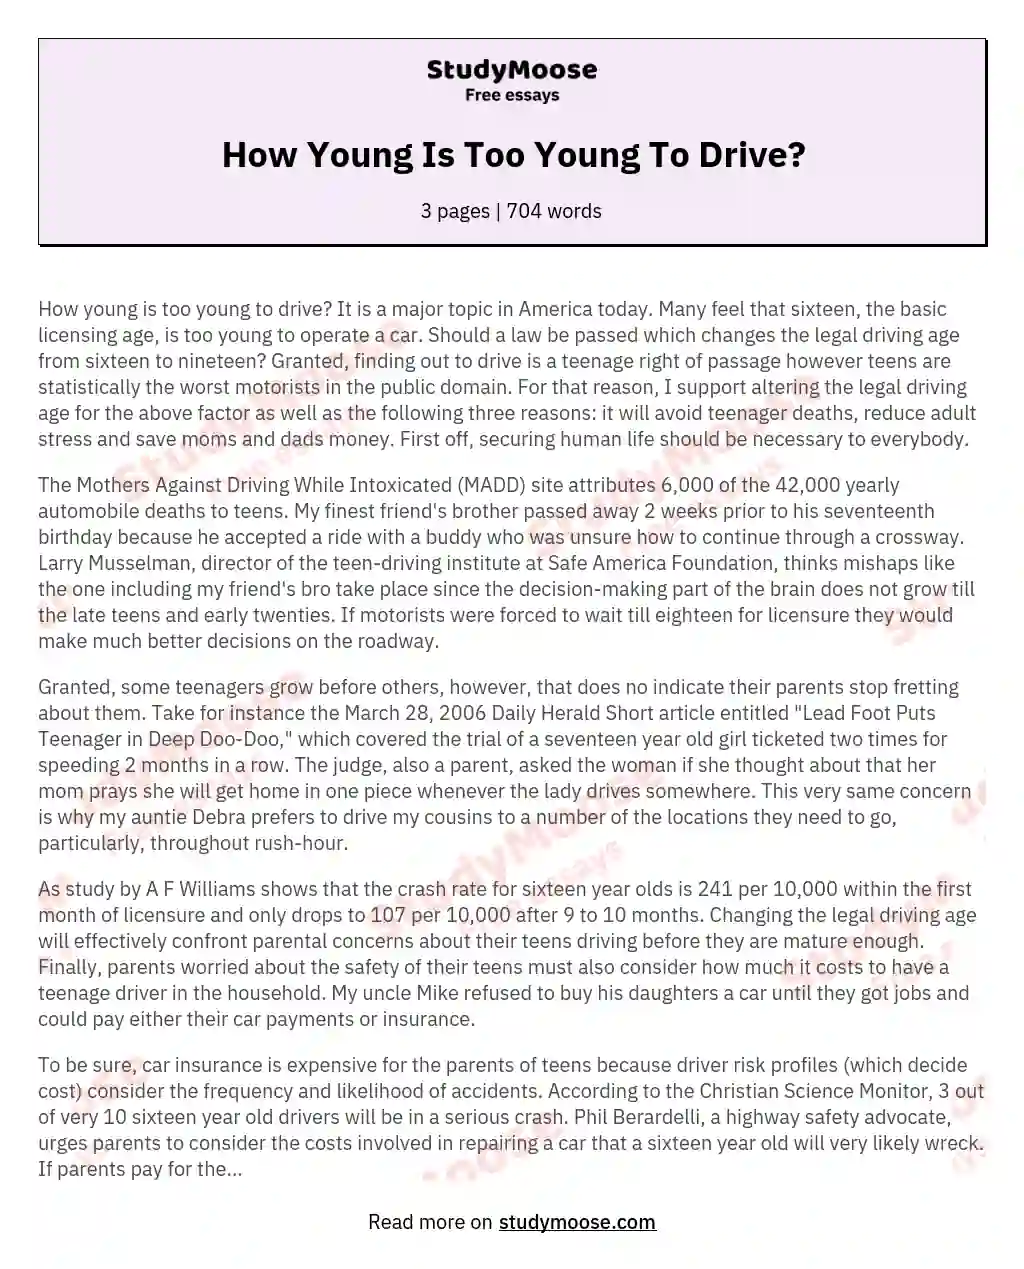 How Young Is Too Young To Drive? essay